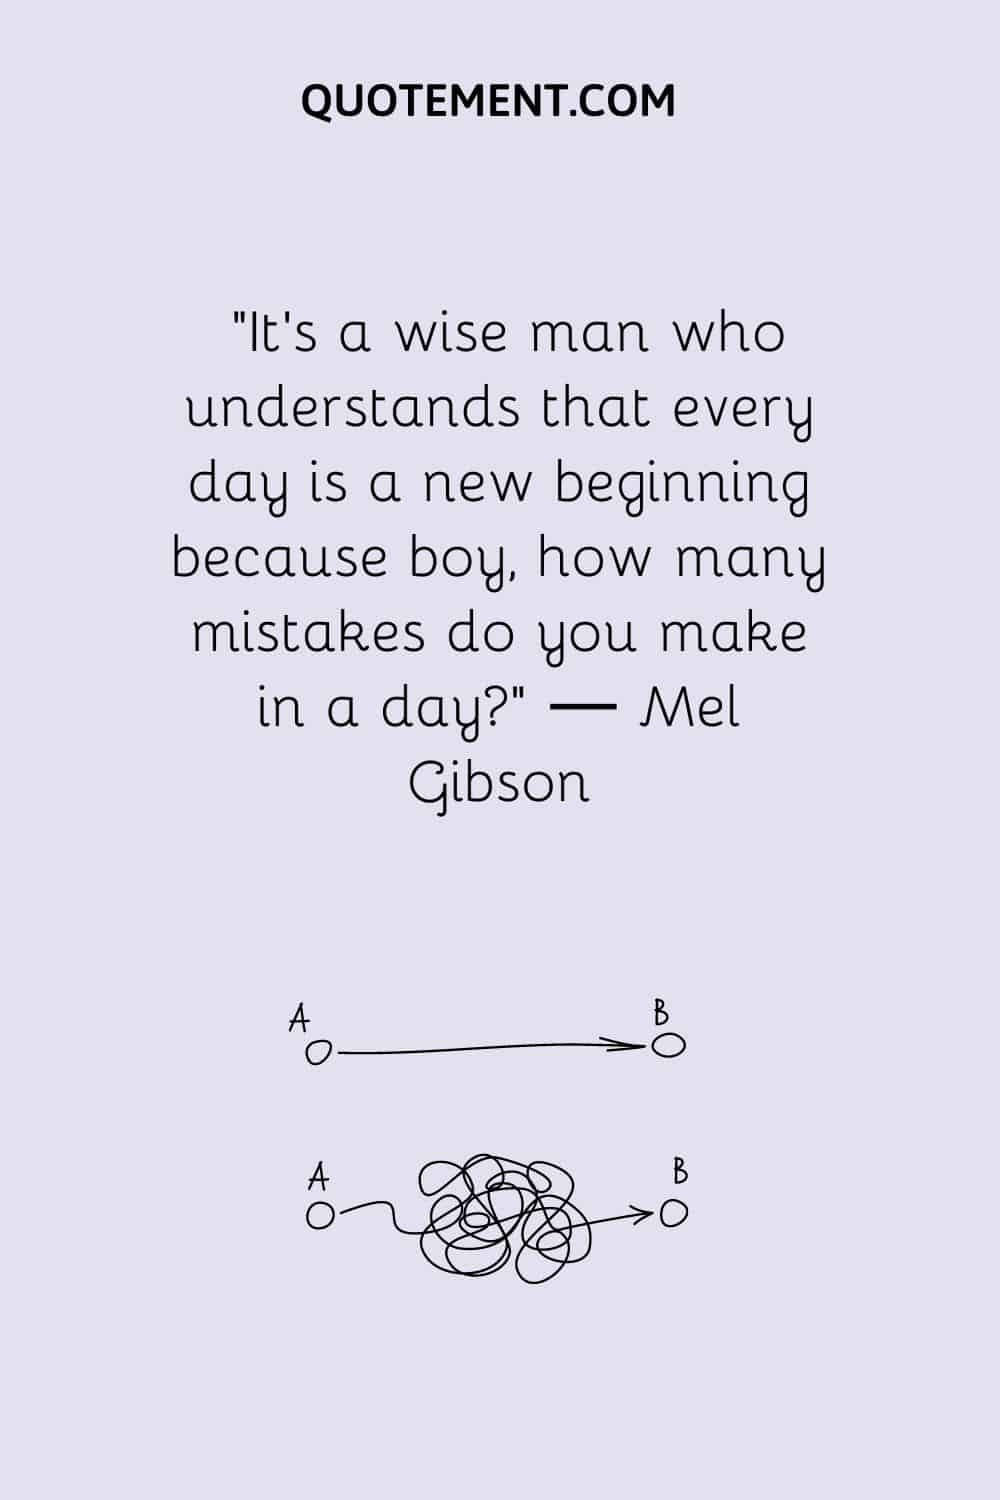 It’s a wise man who understands that every day is a new beginning 